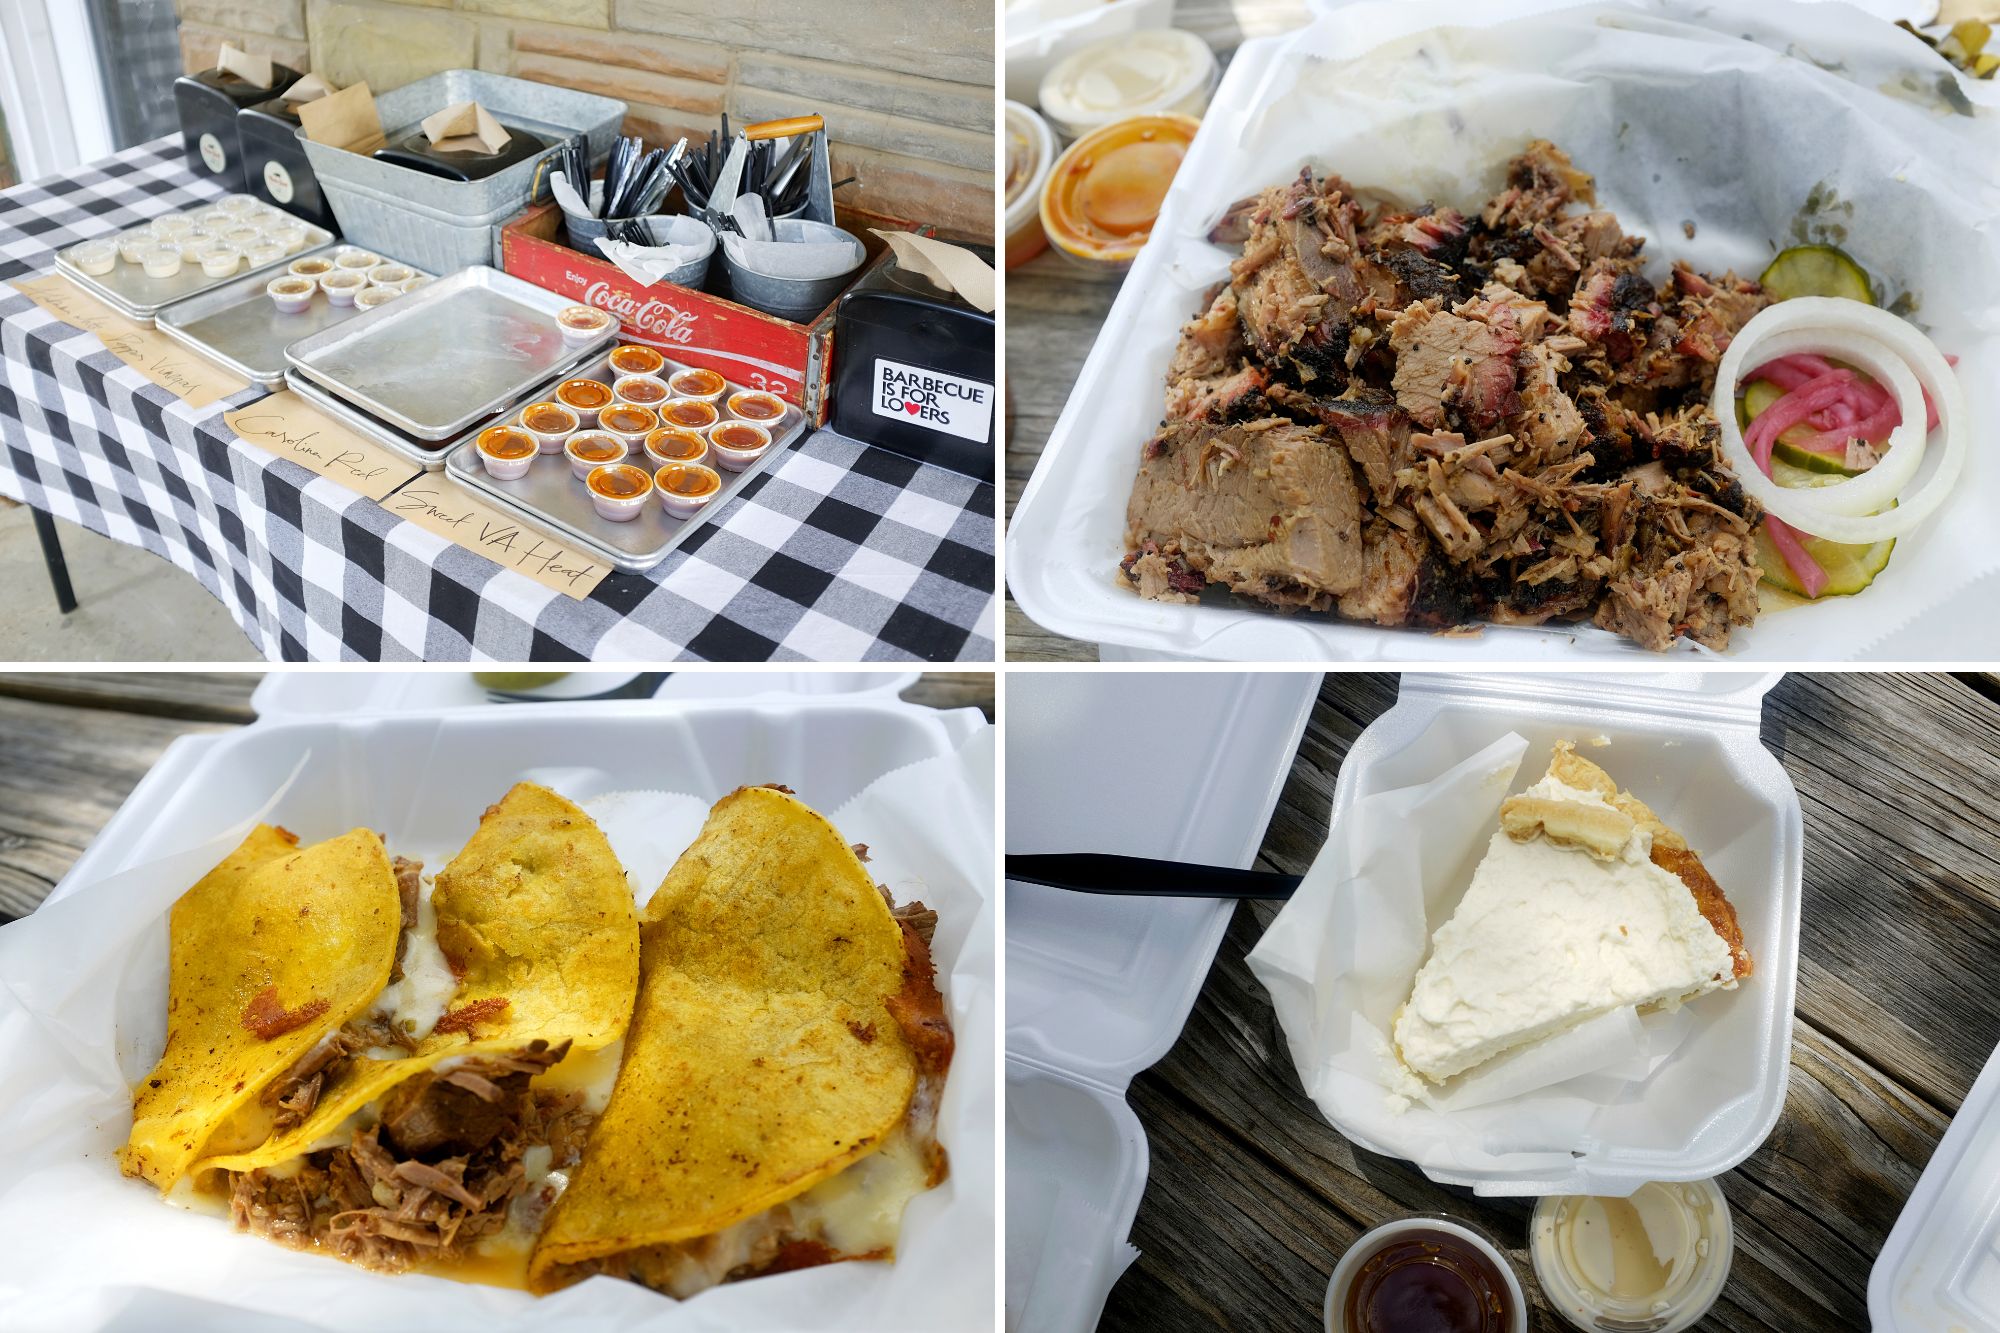 Images of the food: Clockwise, top left: Assorted BBQ sauces, brisket, birria tacos, and vinegar pie